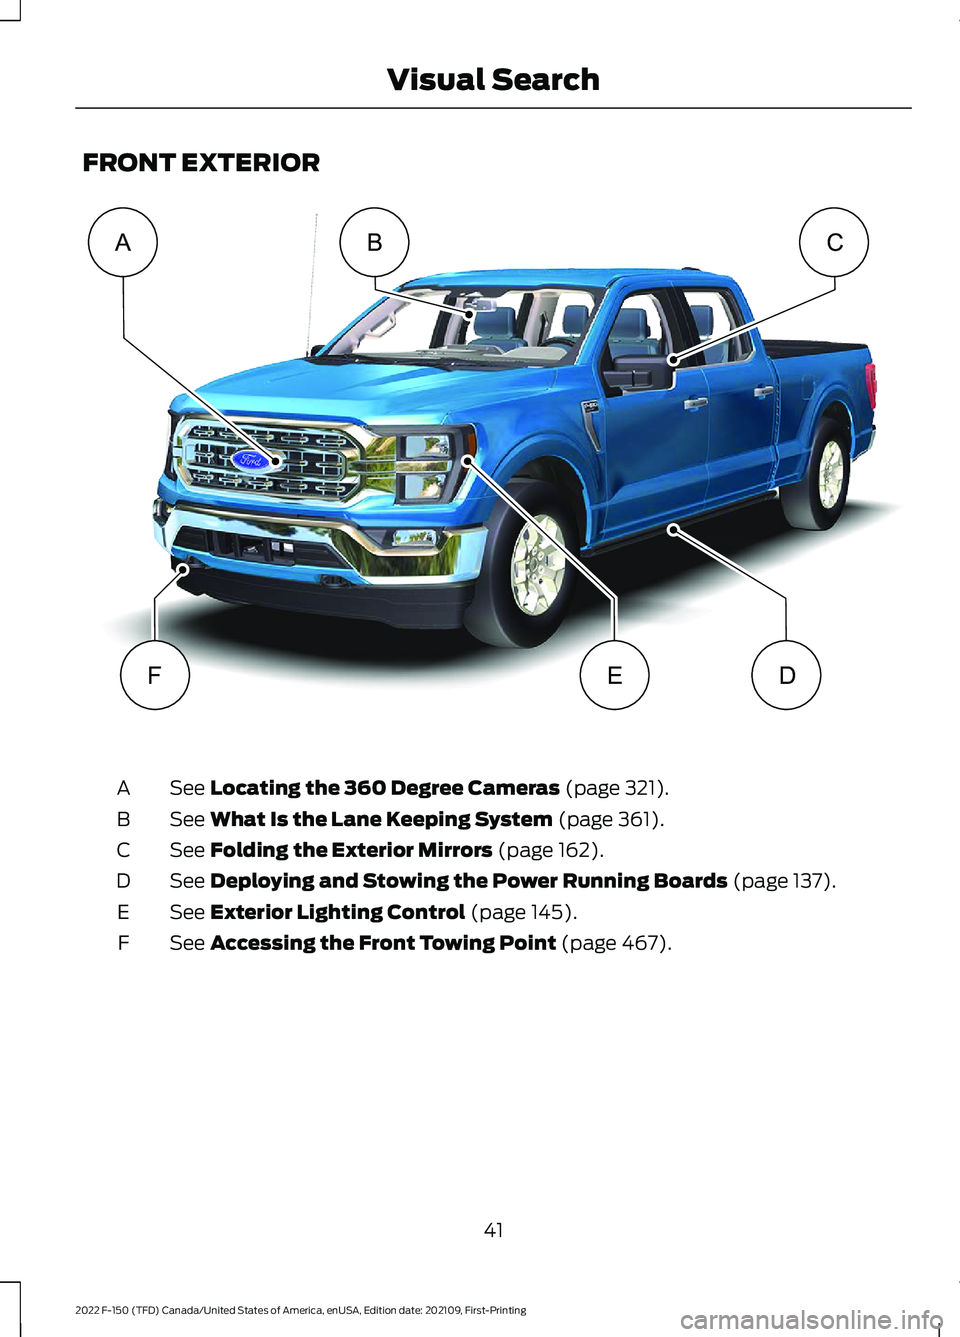 FORD F-150 2022 Service Manual FRONT EXTERIOR
See Locating the 360 Degree Cameras (page 321).
A
See 
What Is the Lane Keeping System (page 361).
B
See 
Folding the Exterior Mirrors (page 162).
C
See 
Deploying and Stowing the Power